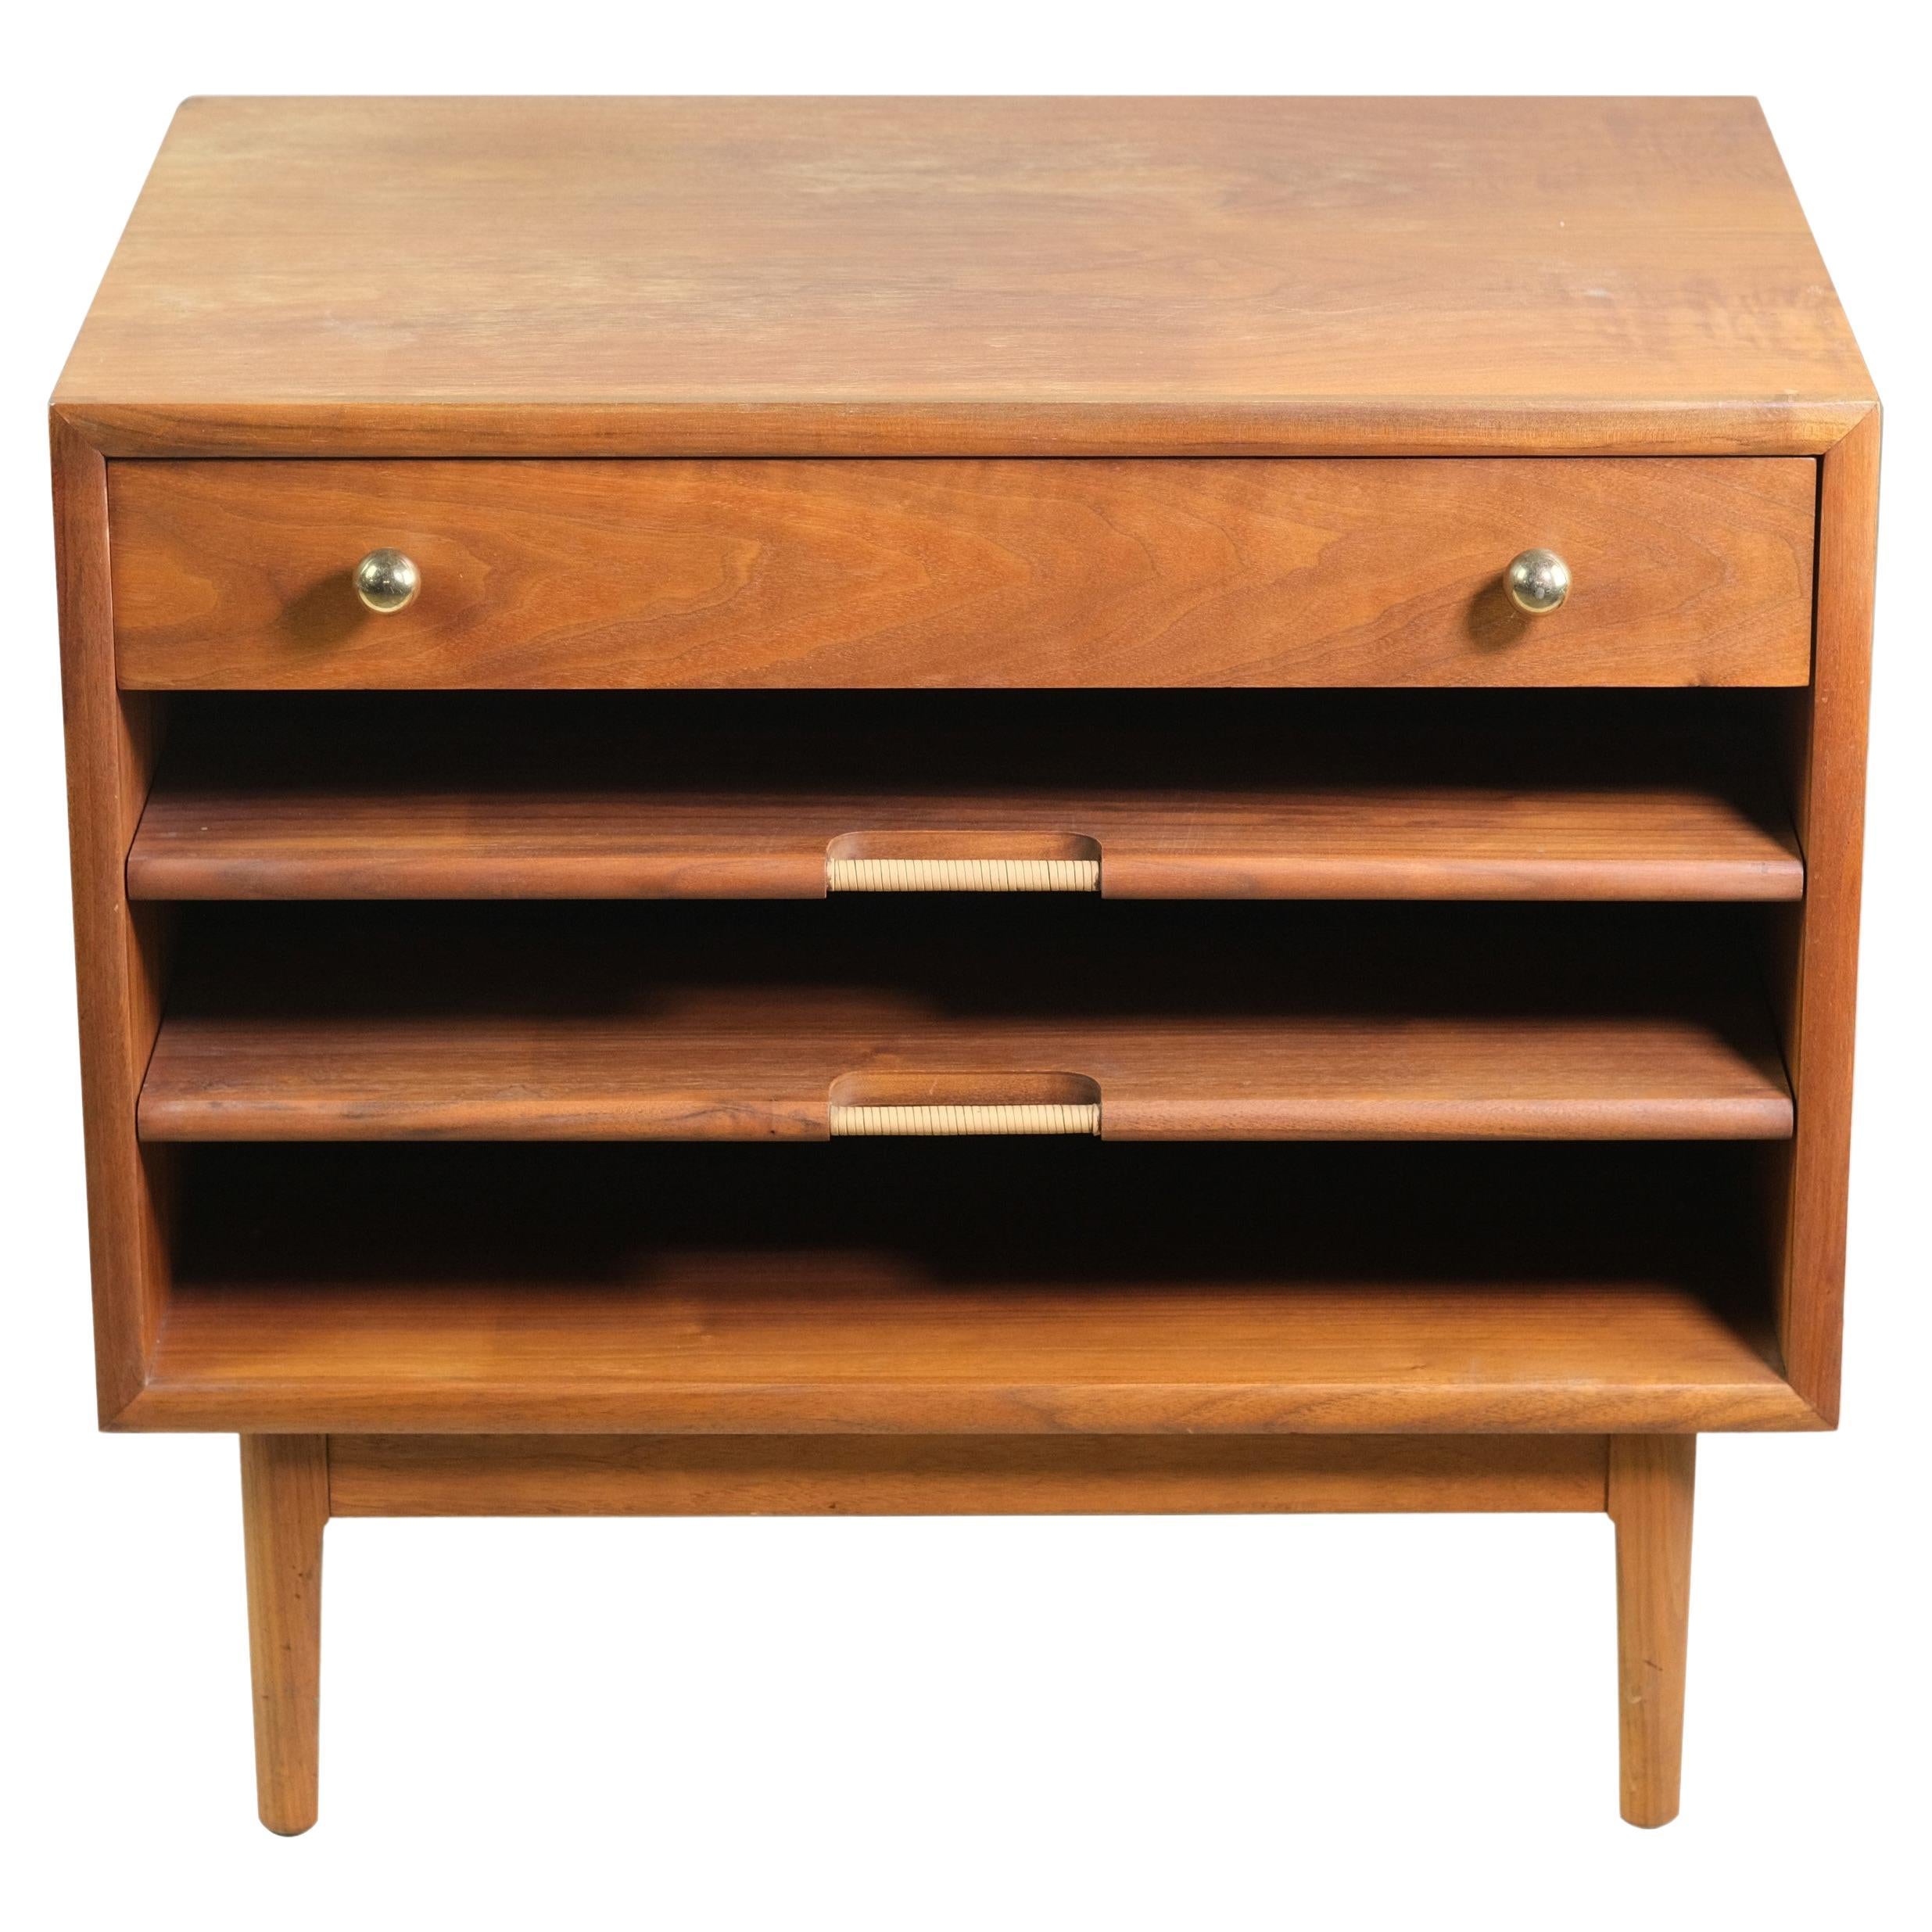 Drexel Walnut End Table One Drawer 2 Pull-Out Shelves